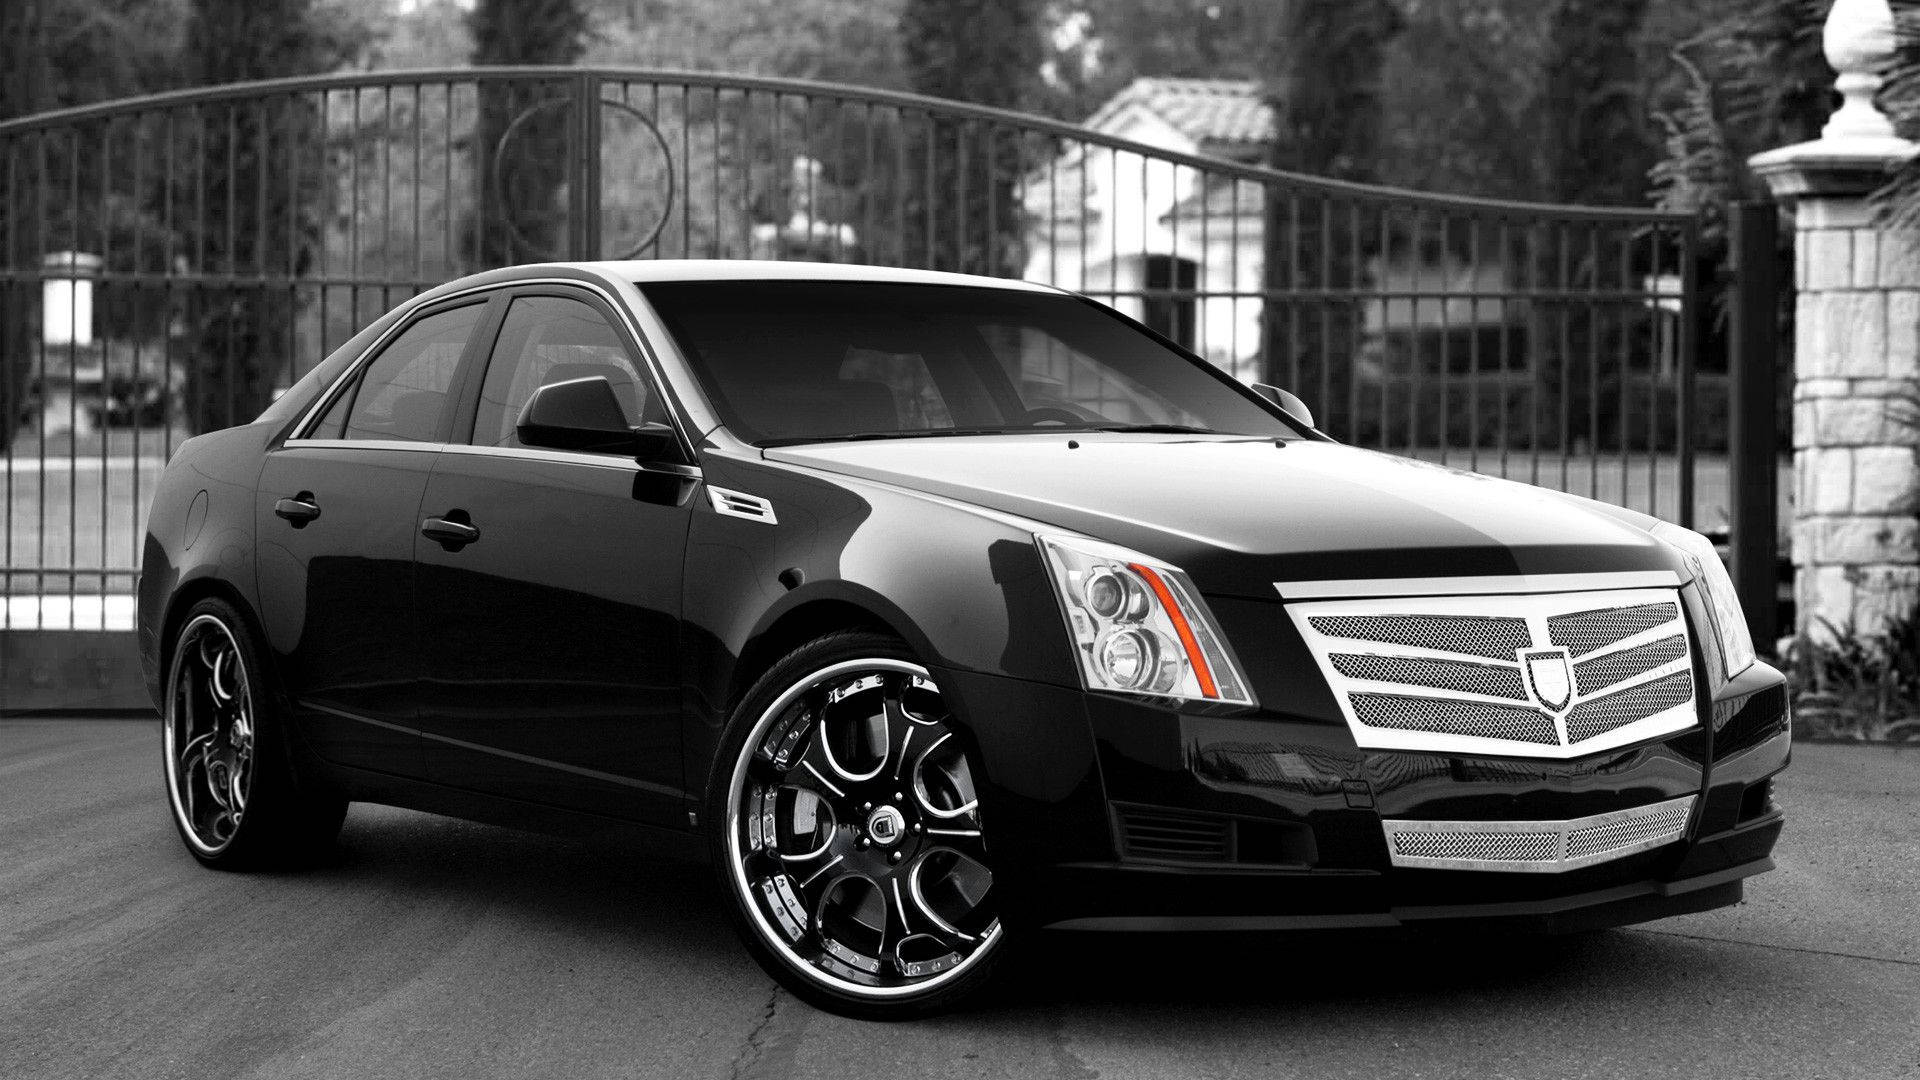 Black Cadillac Cts Background